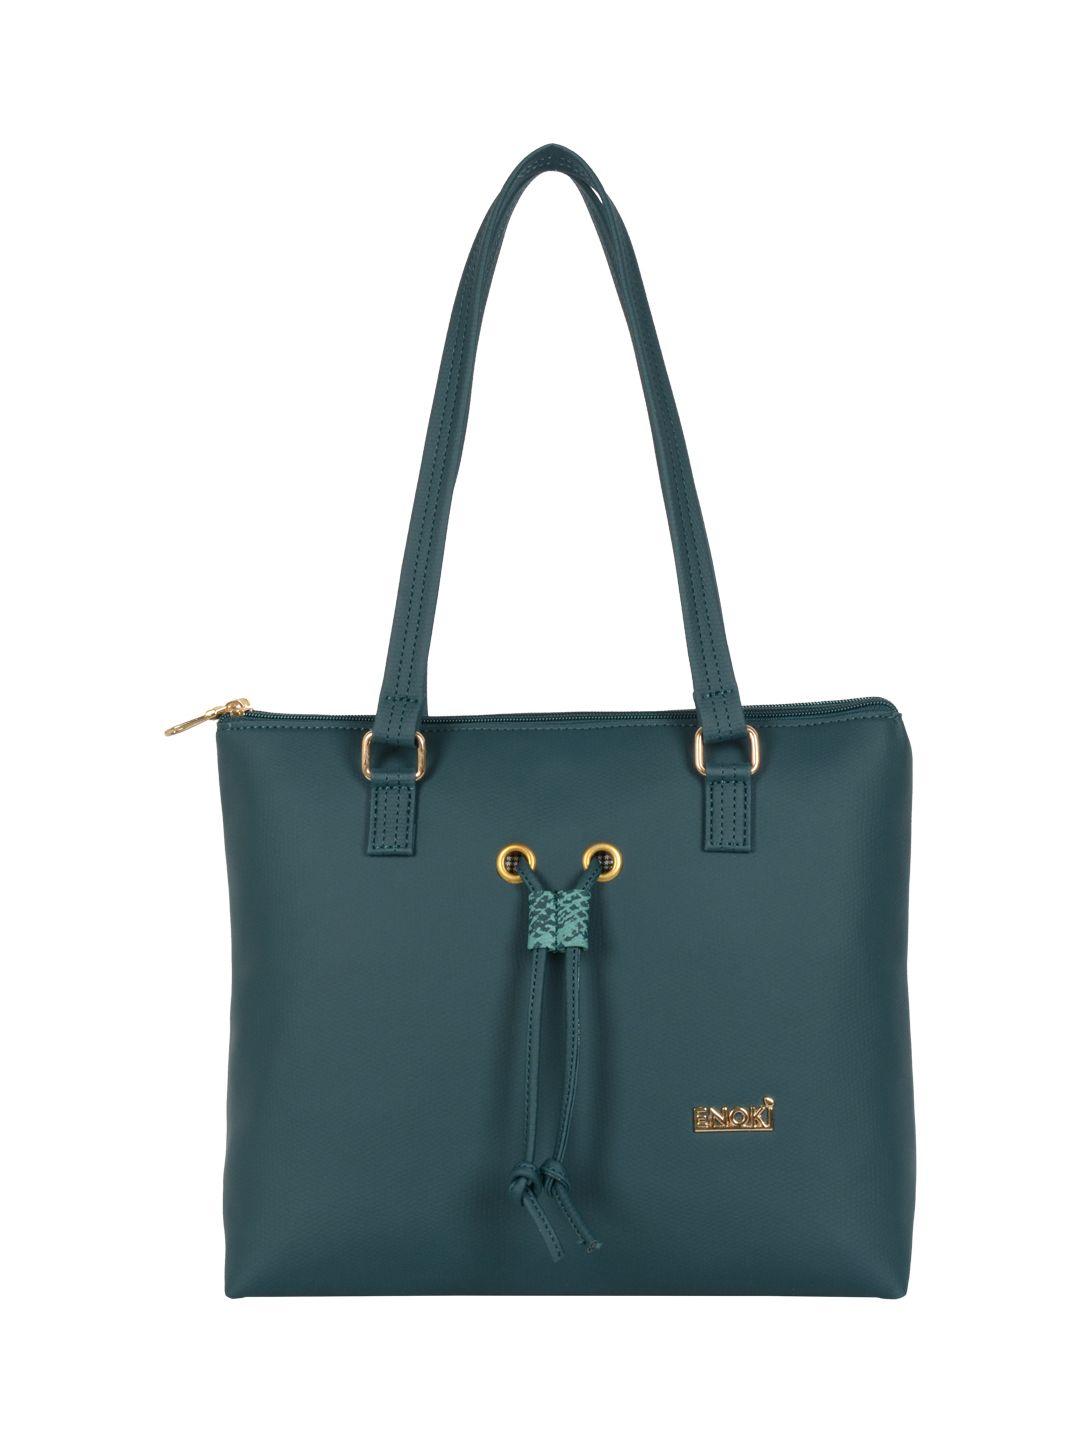 enoki women green structured tote bag with tasselled